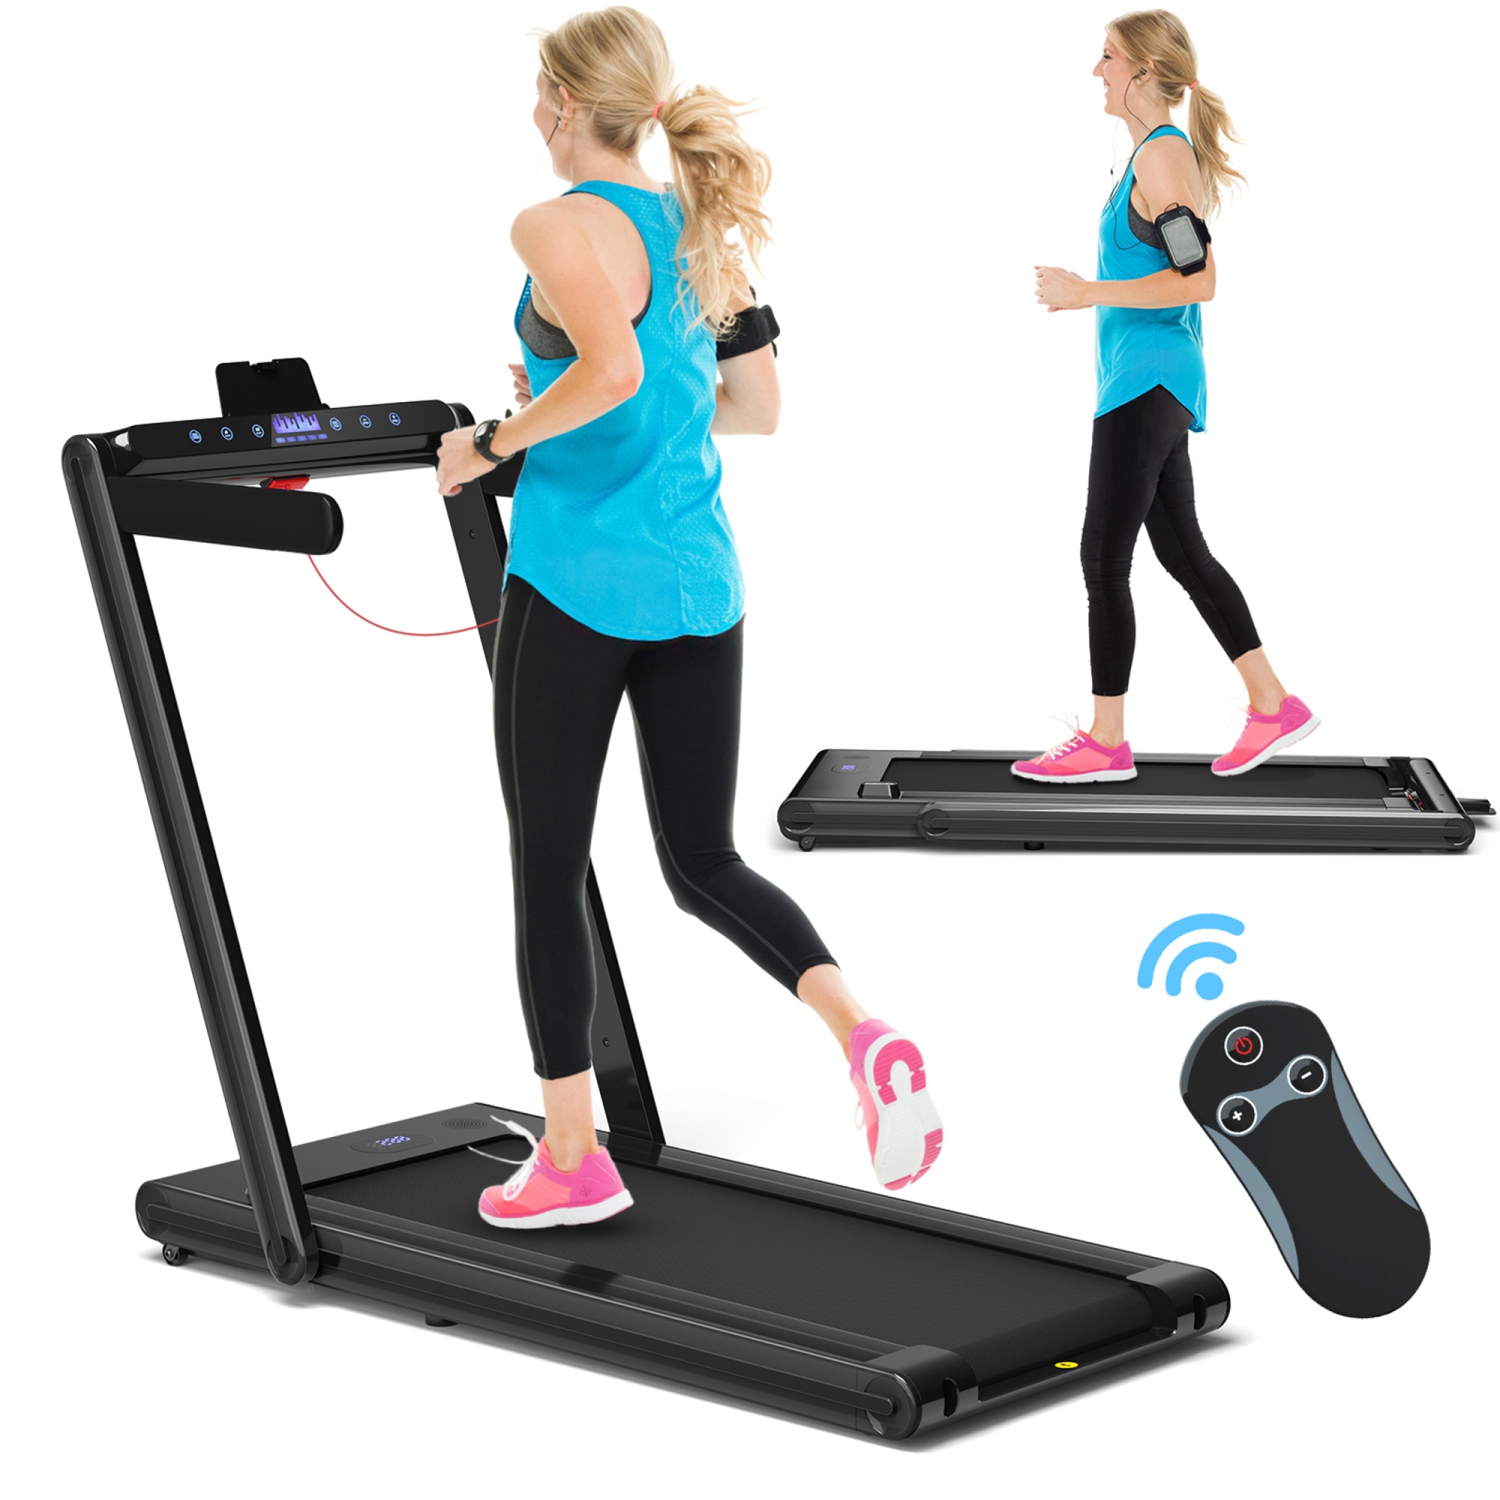 Portable for Home Gym Small Apartment Remote Folding 2 in 1 Electric Running Walking Machine with Smart App Control Blue Tooth Speaker & Dual LED Screen Monitor GYMAX Under Desk Treadmill 